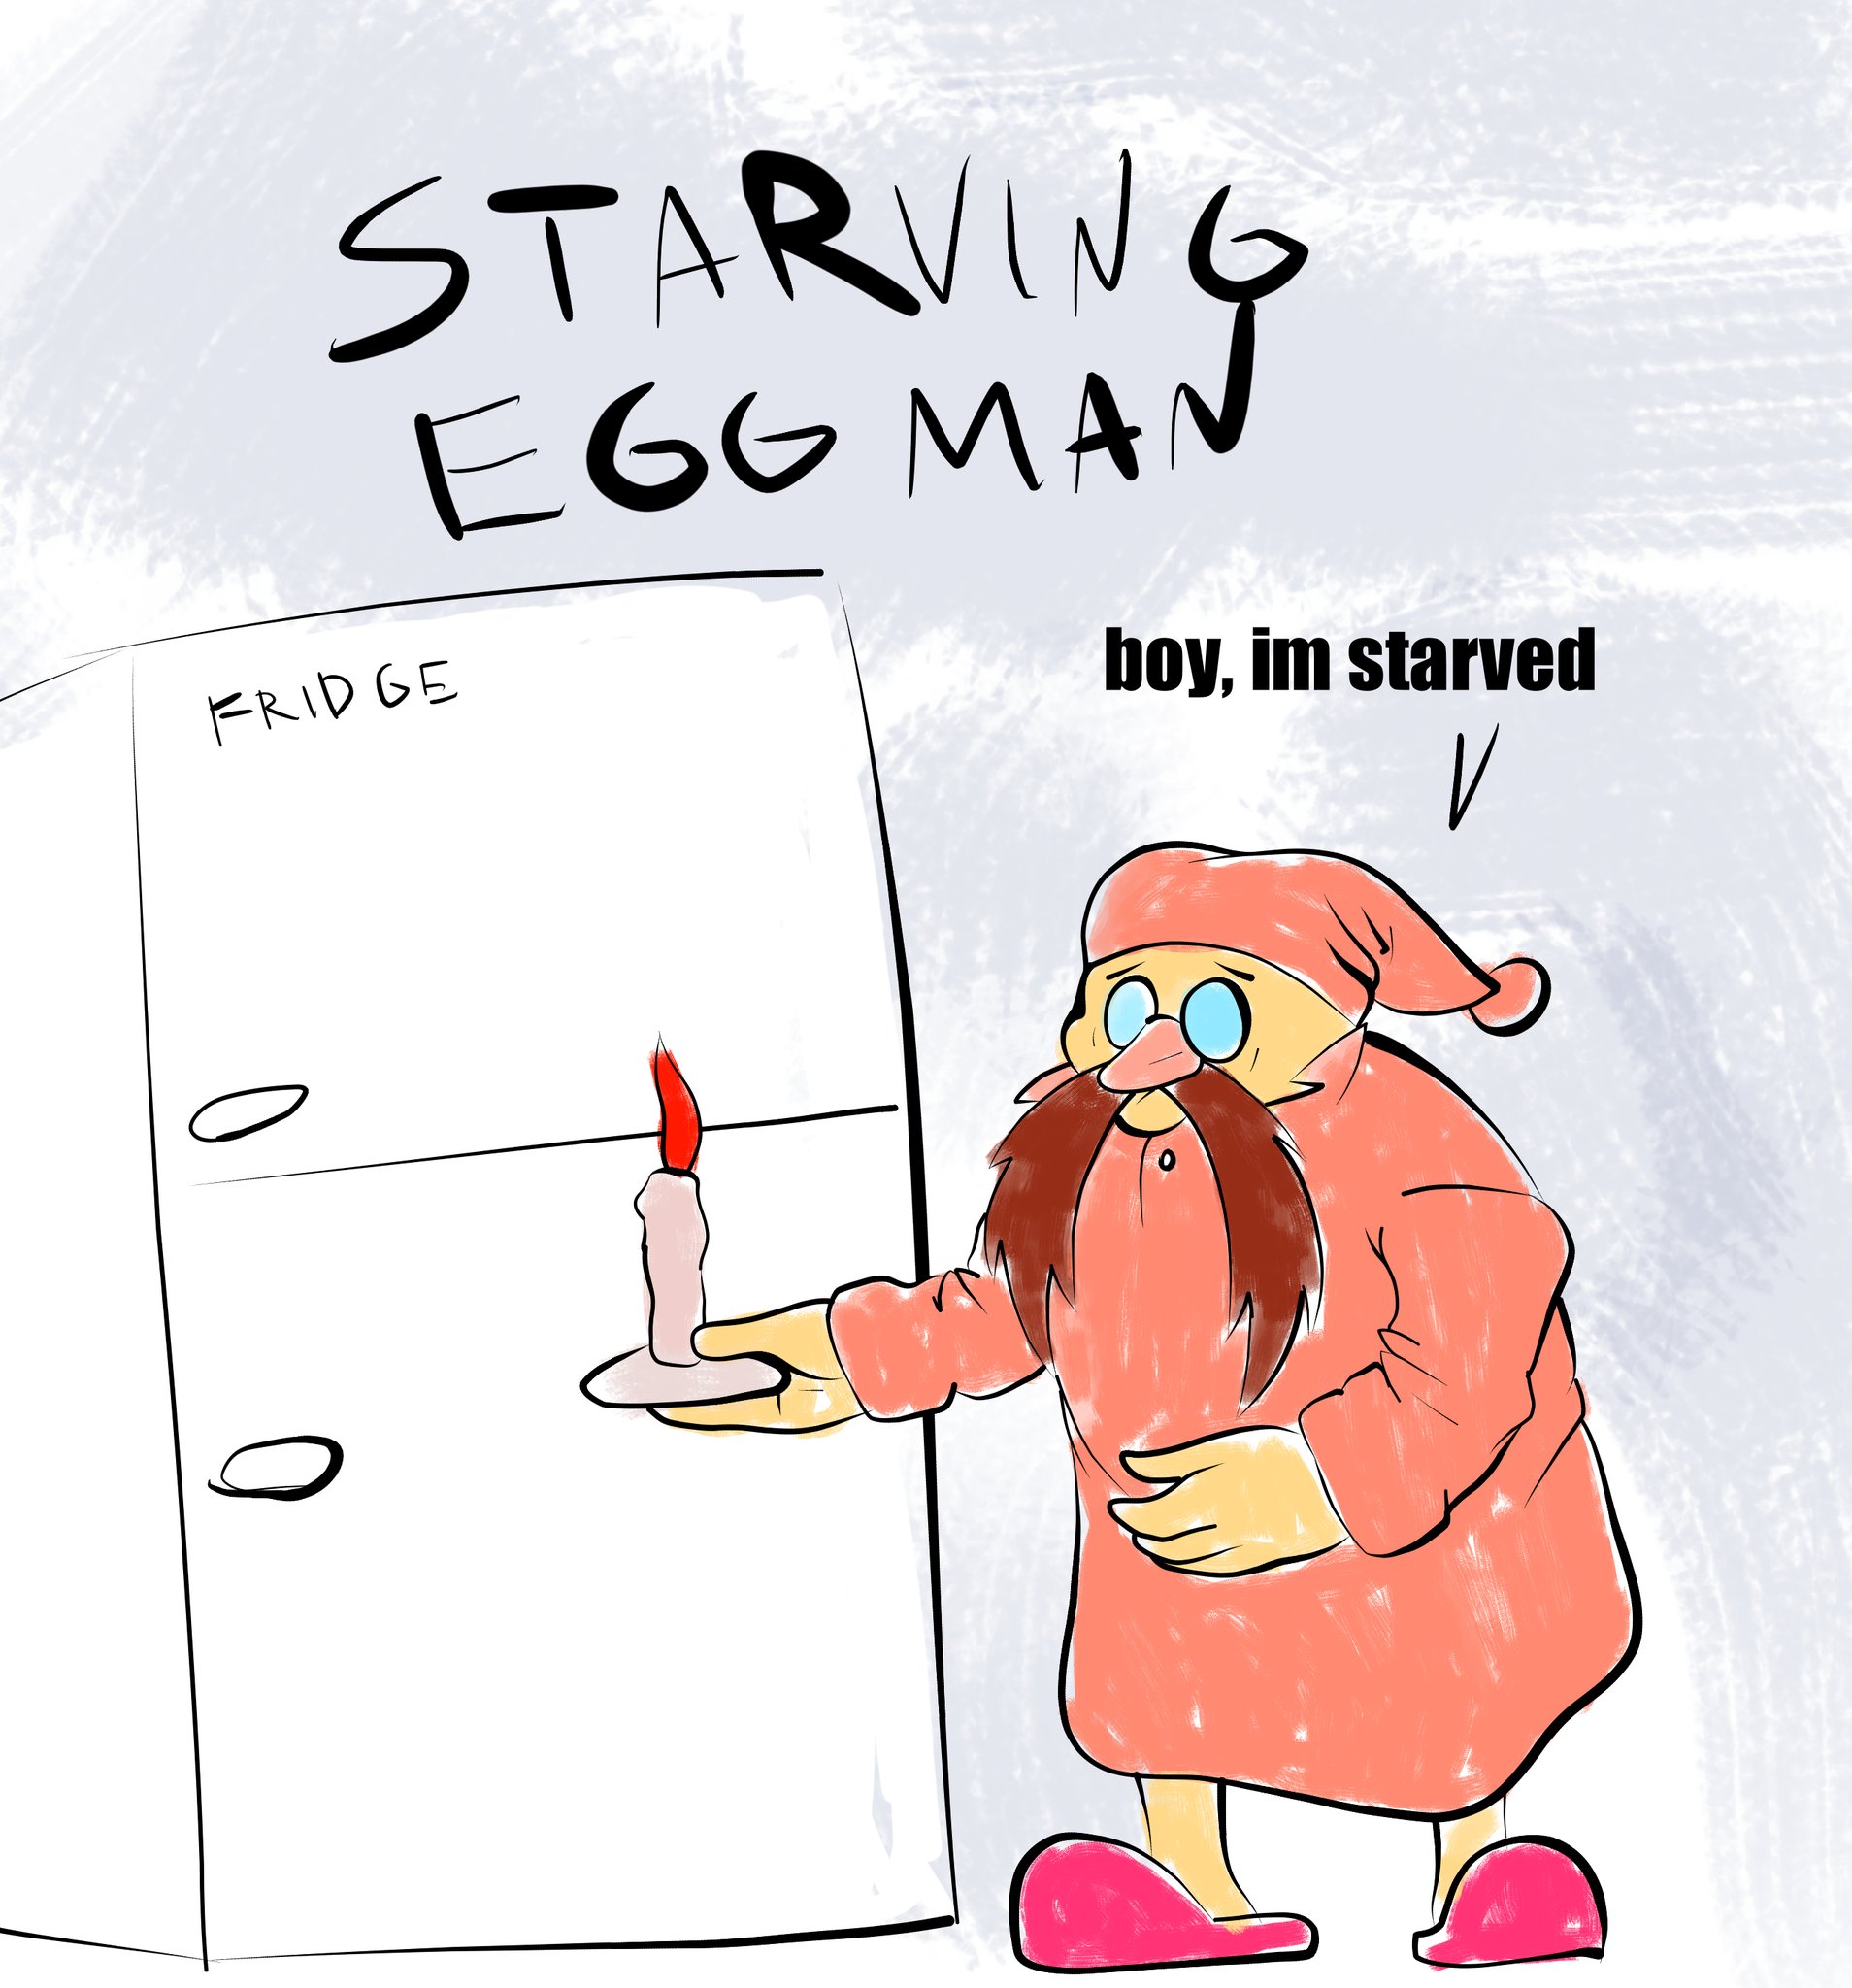 knuckles the chuckles on X: I was bored and starving eggman is or was  trending so heres my take on starved eggman #starvedeggman   / X